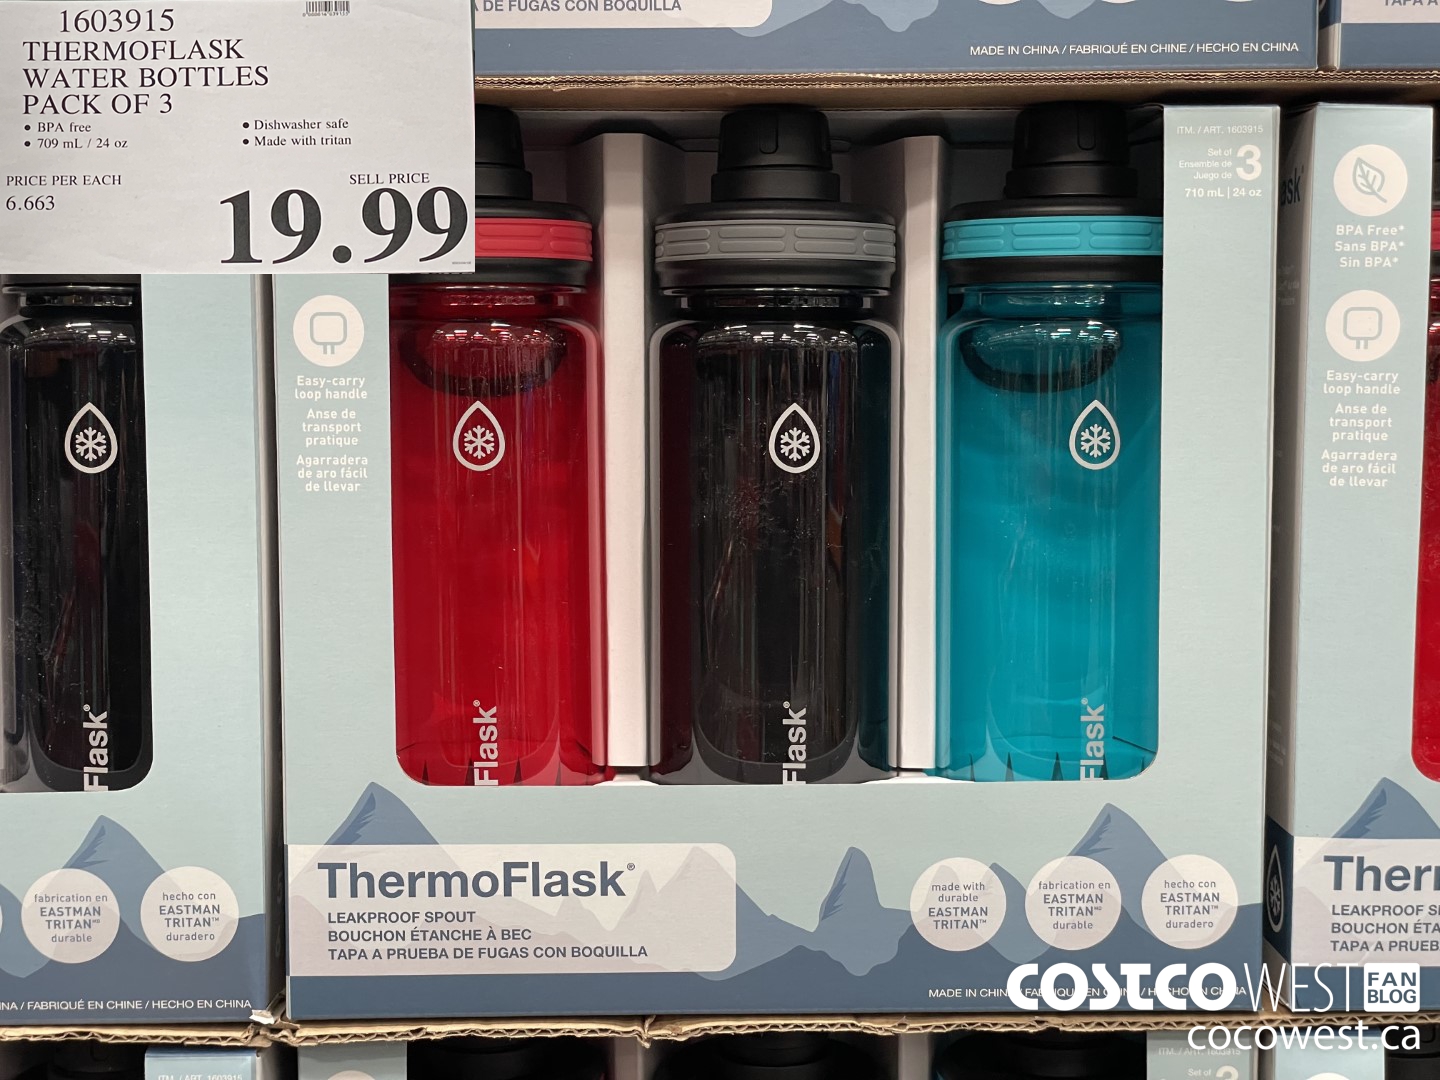 https://west.cocowest1.ca/2022/04/THERMOFLASK_WATER_BOTTLES_PACK_OF_3_20220422_86453.jpg